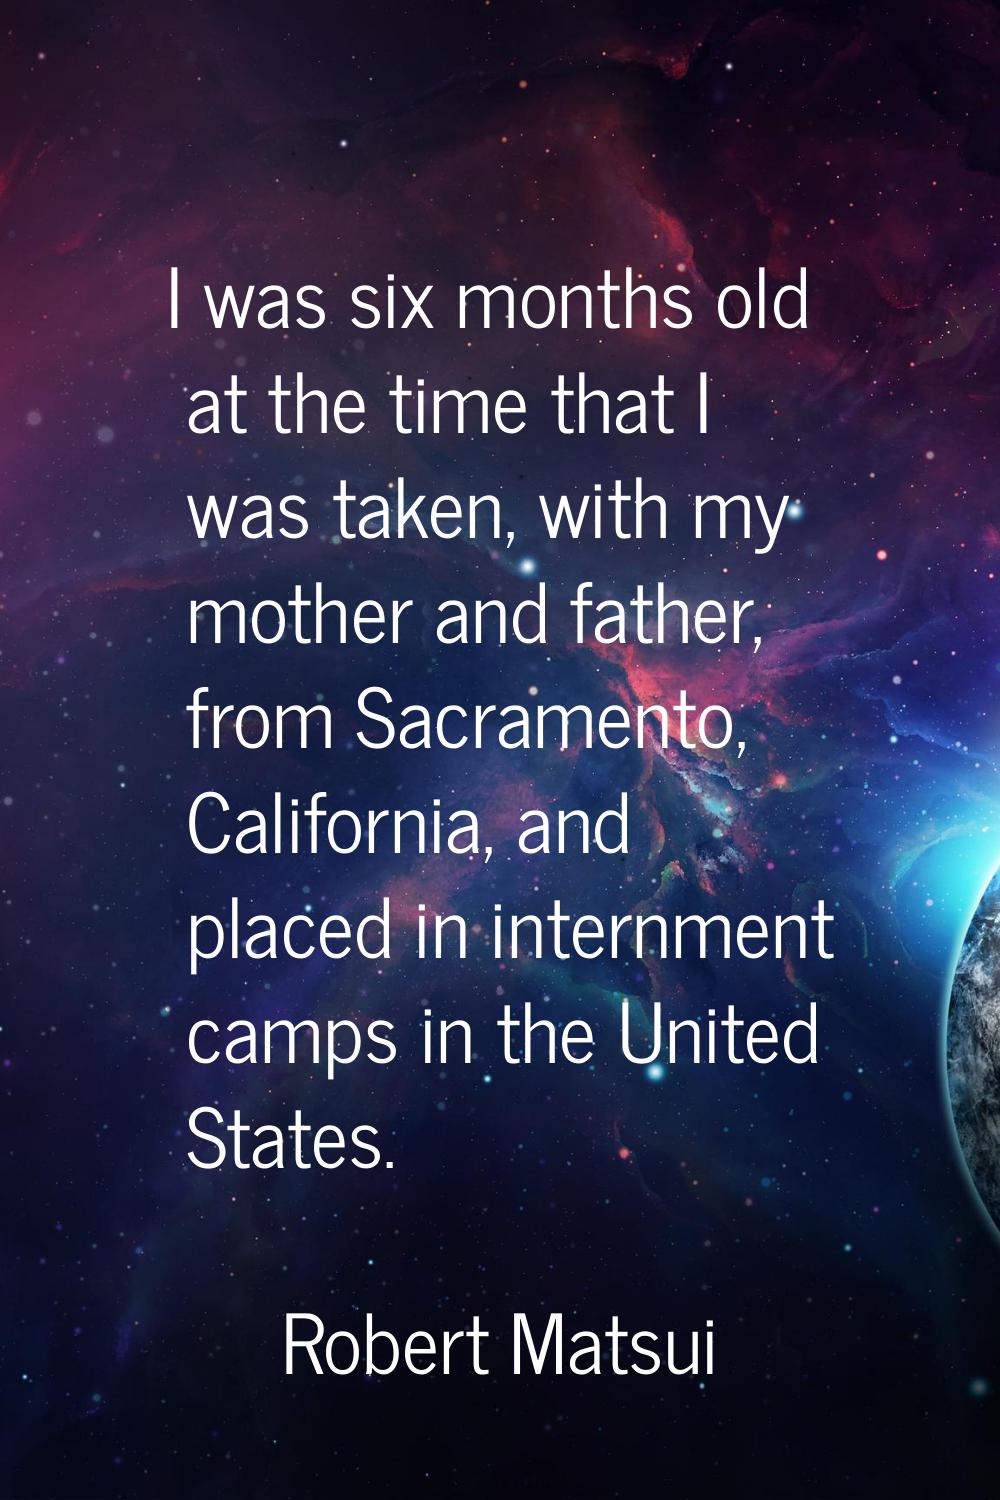 I was six months old at the time that I was taken, with my mother and father, from Sacramento, Cali